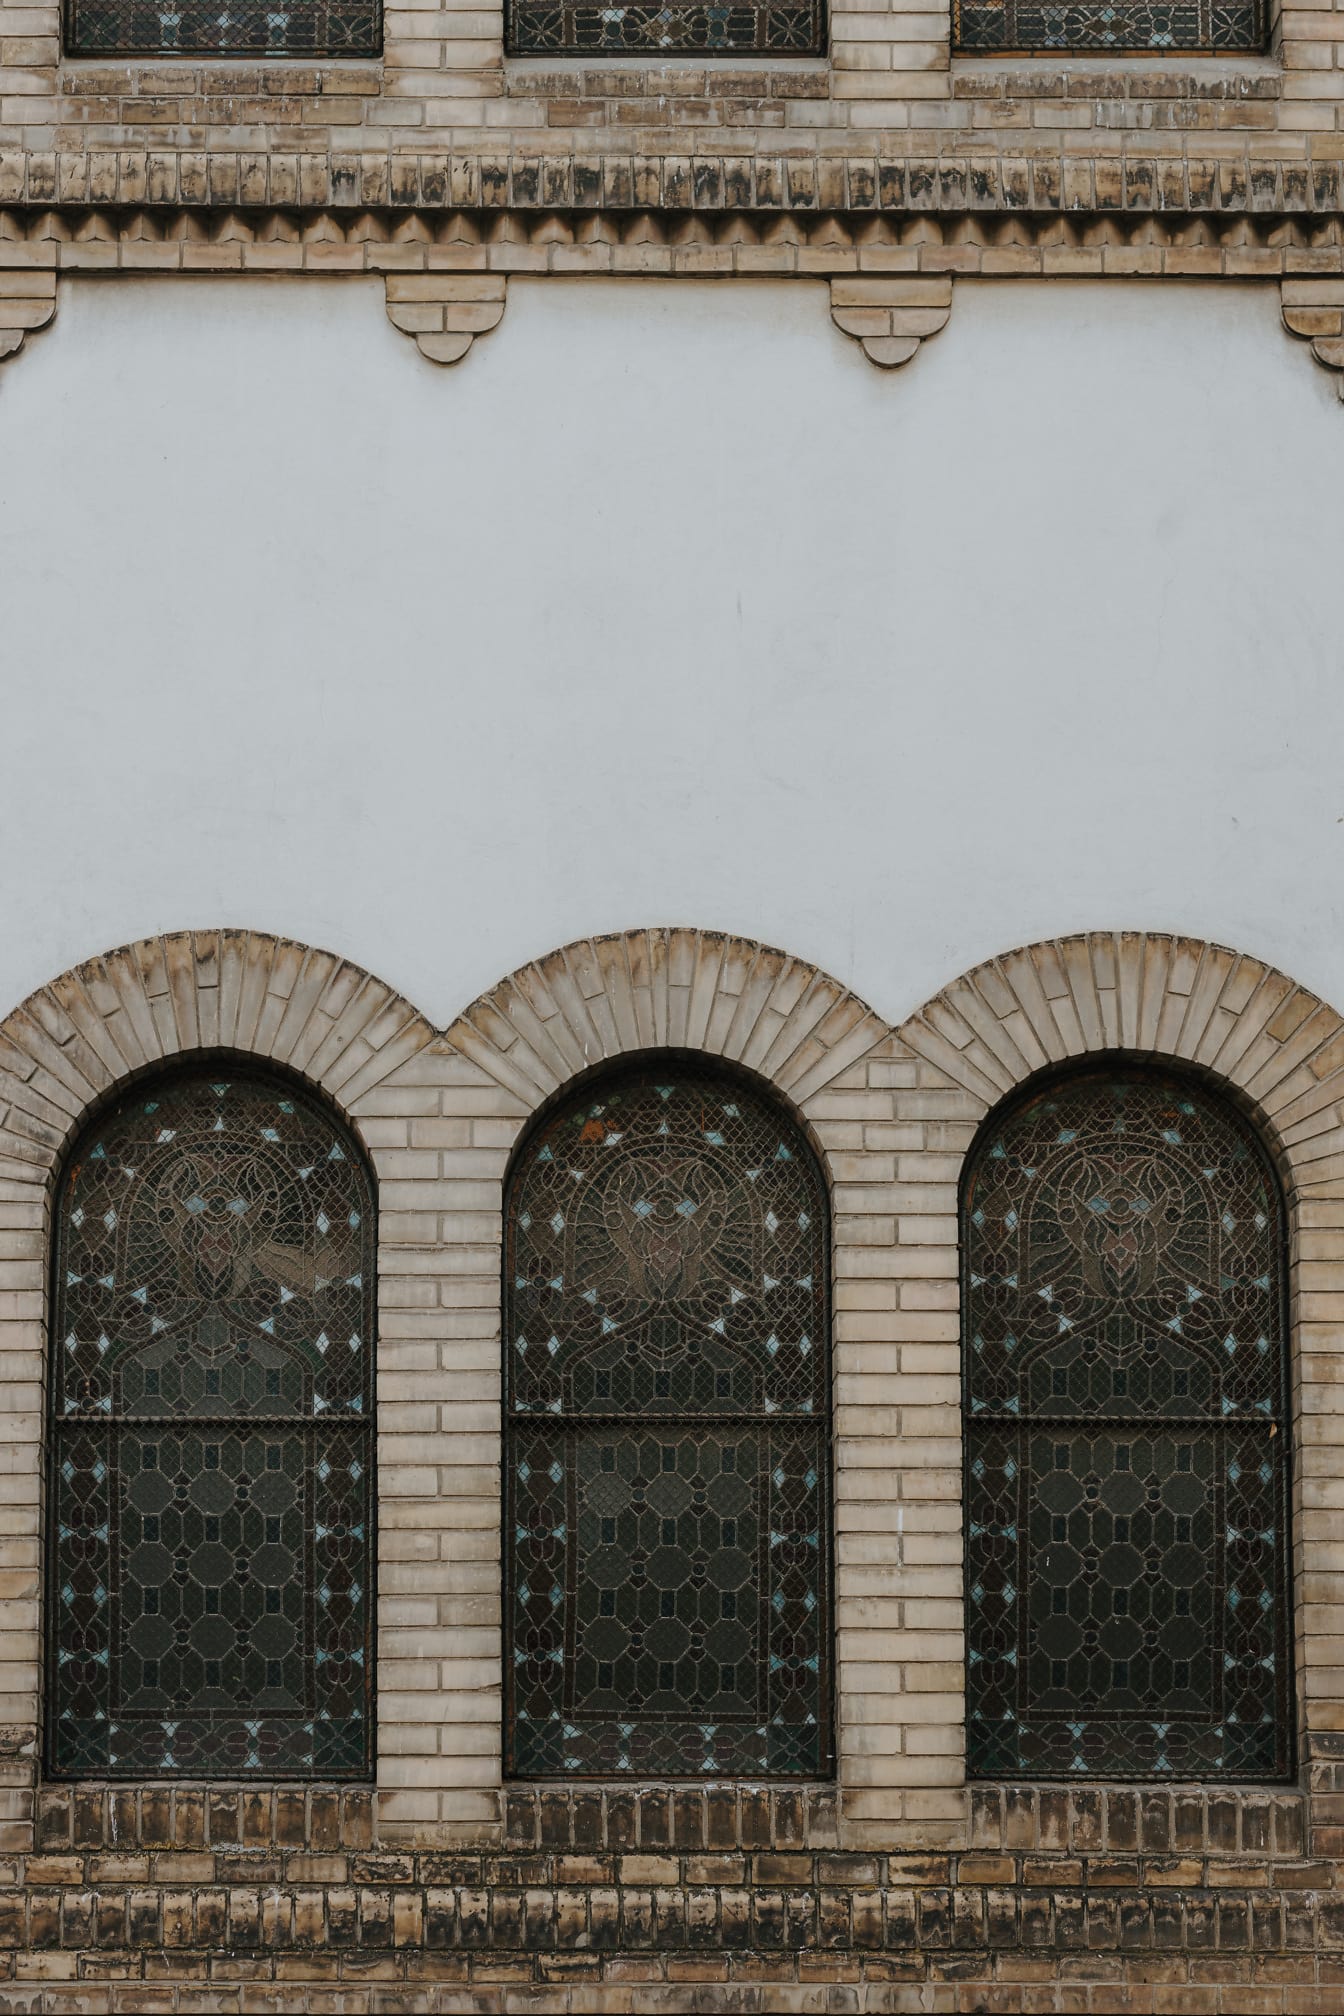 Three stained glass windows with arches